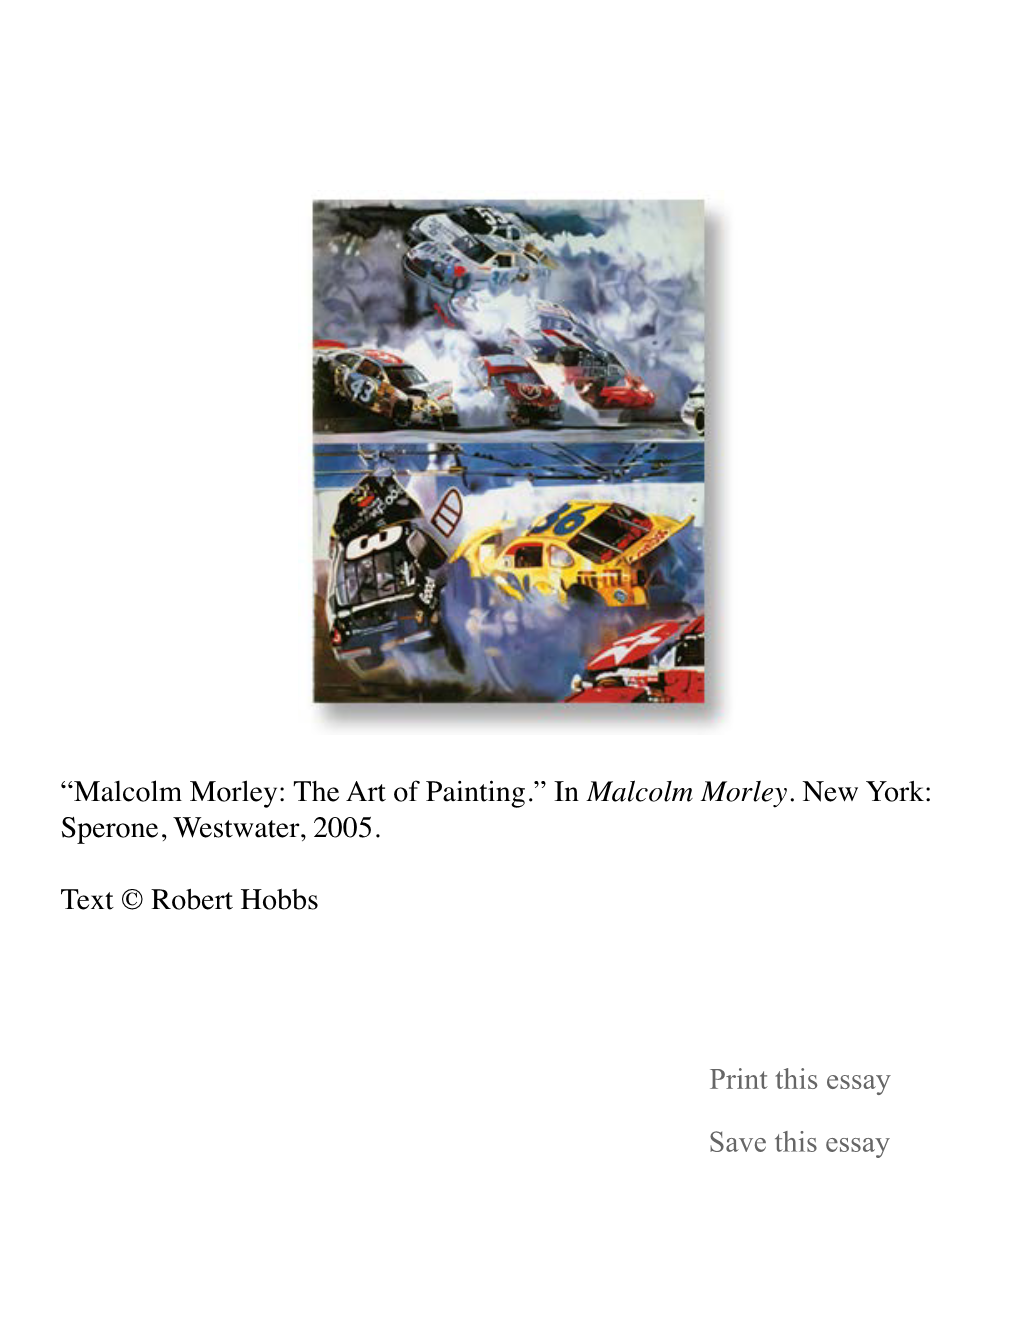 Malcolm Morley: the Art of Painting.” in Malcolm Morley